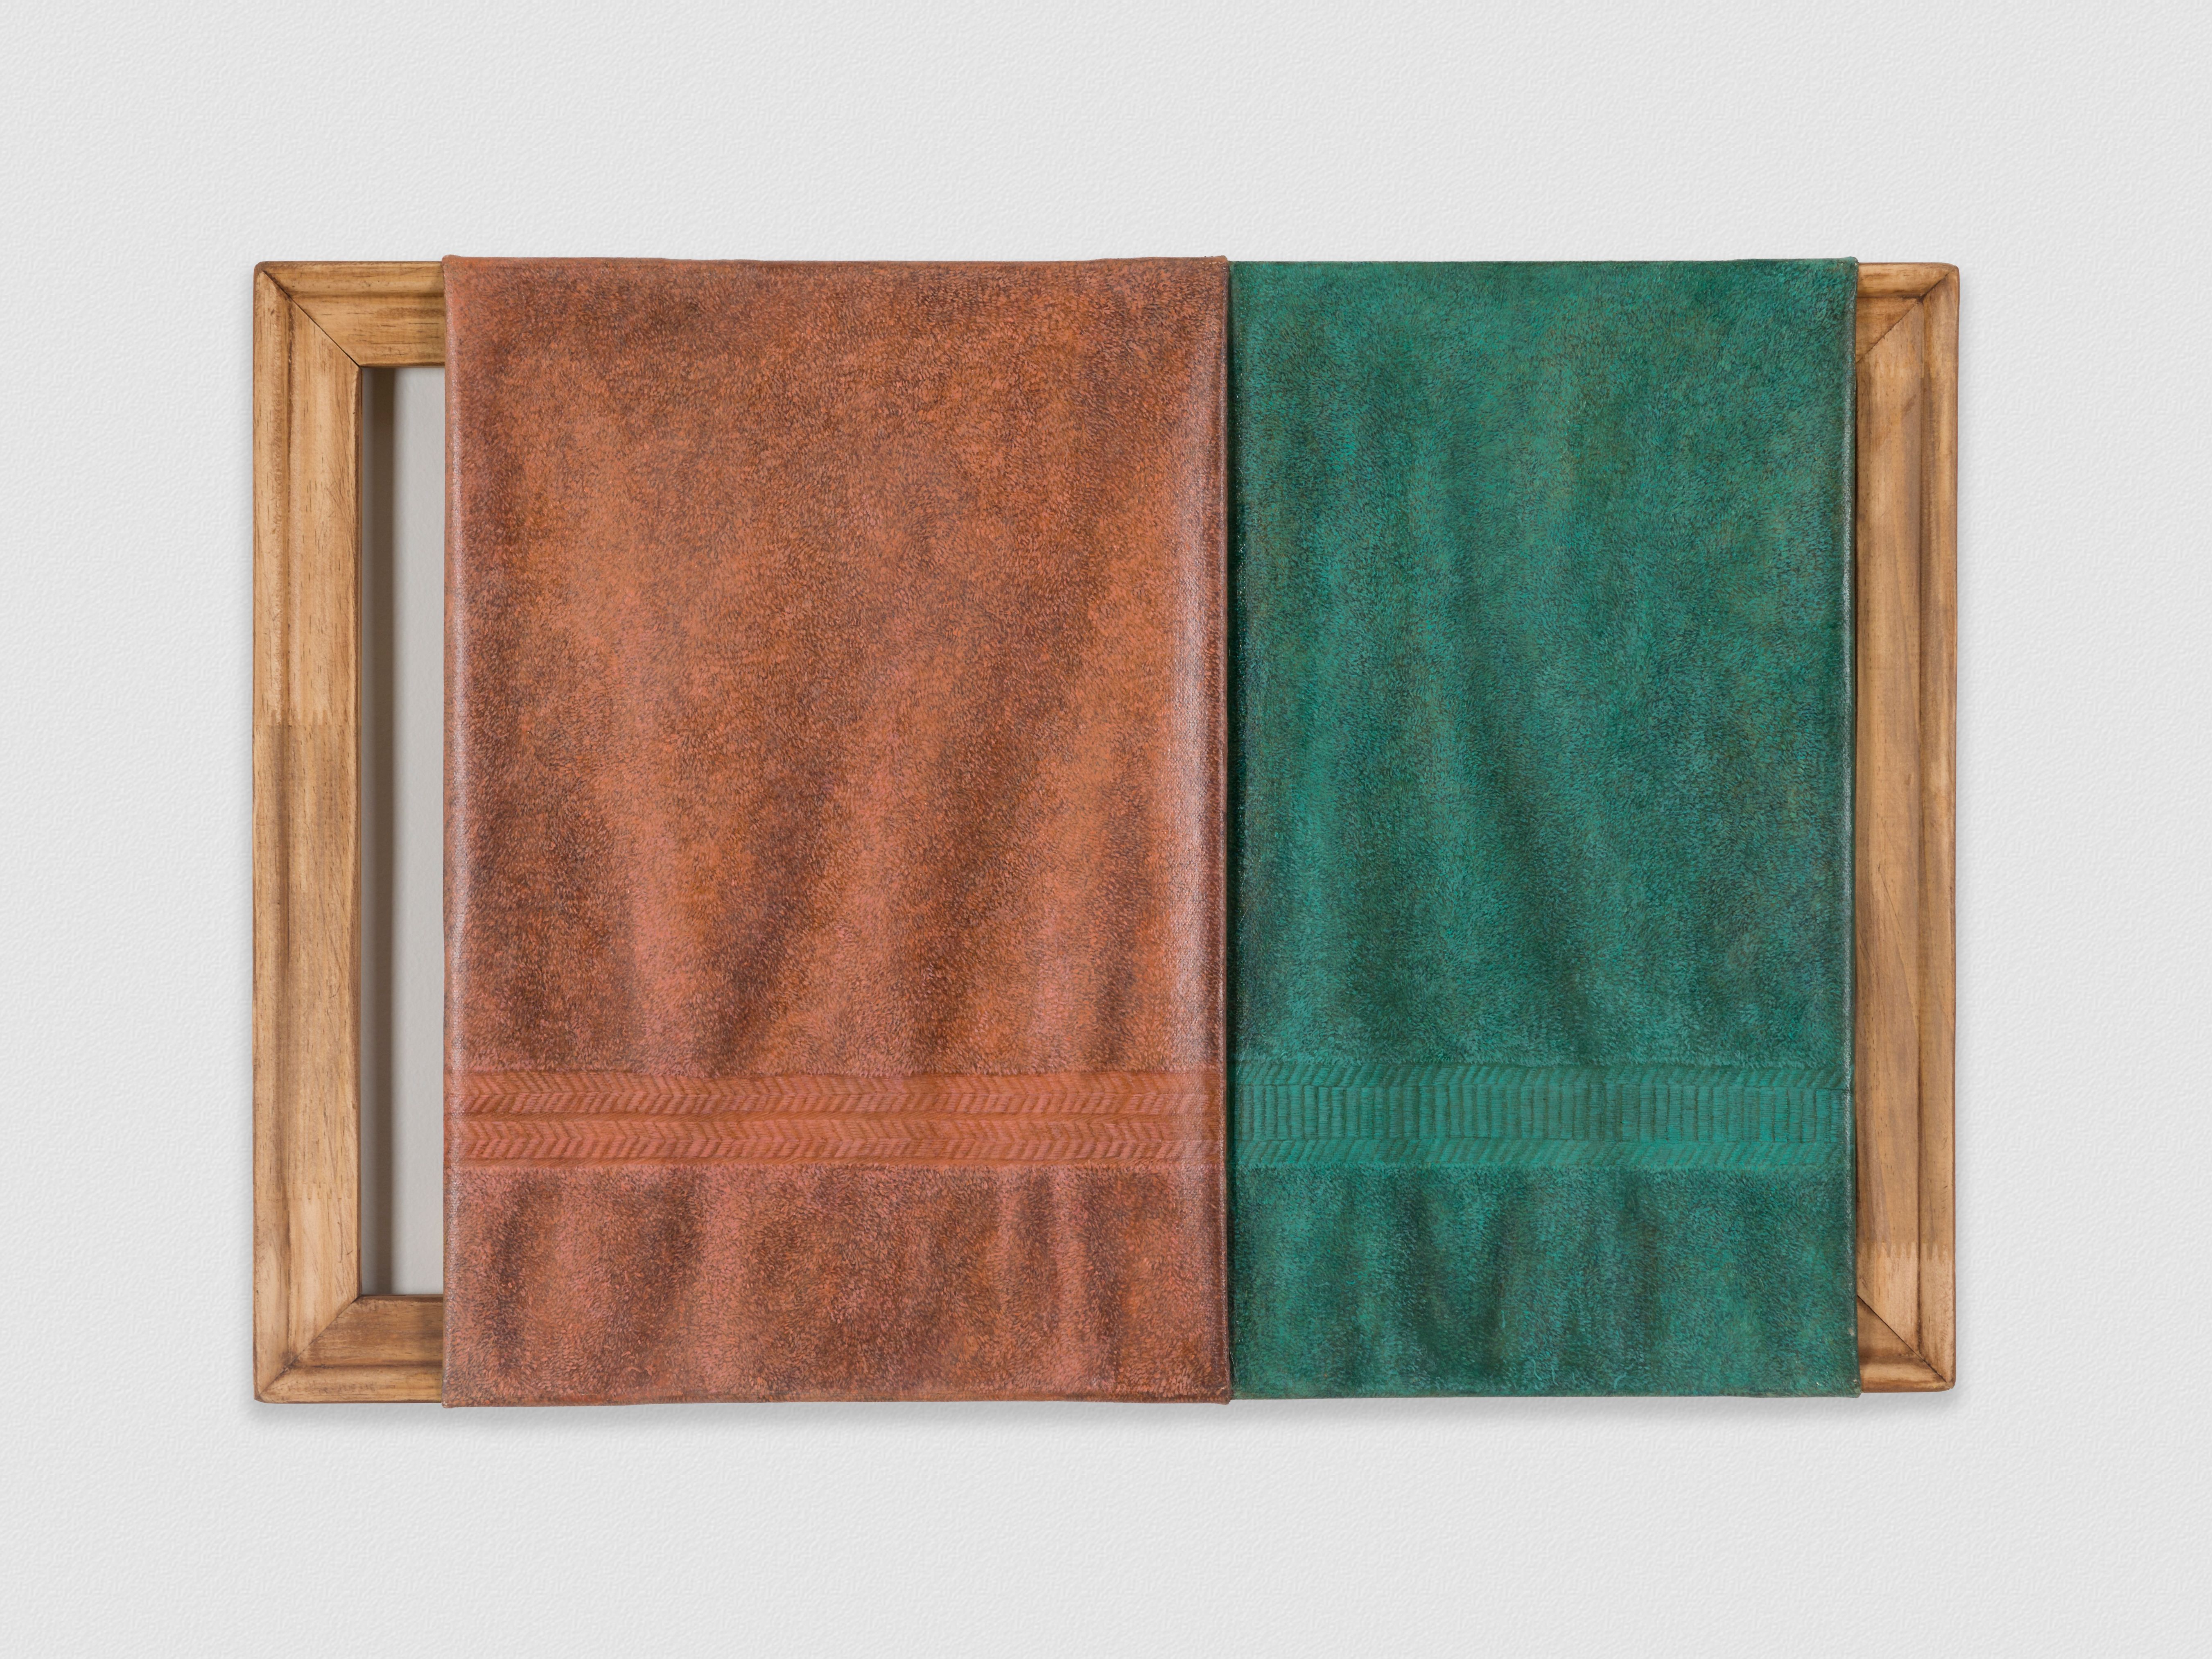 Painting of two towels, one orange and one teal, wrapped over a wooden frame.